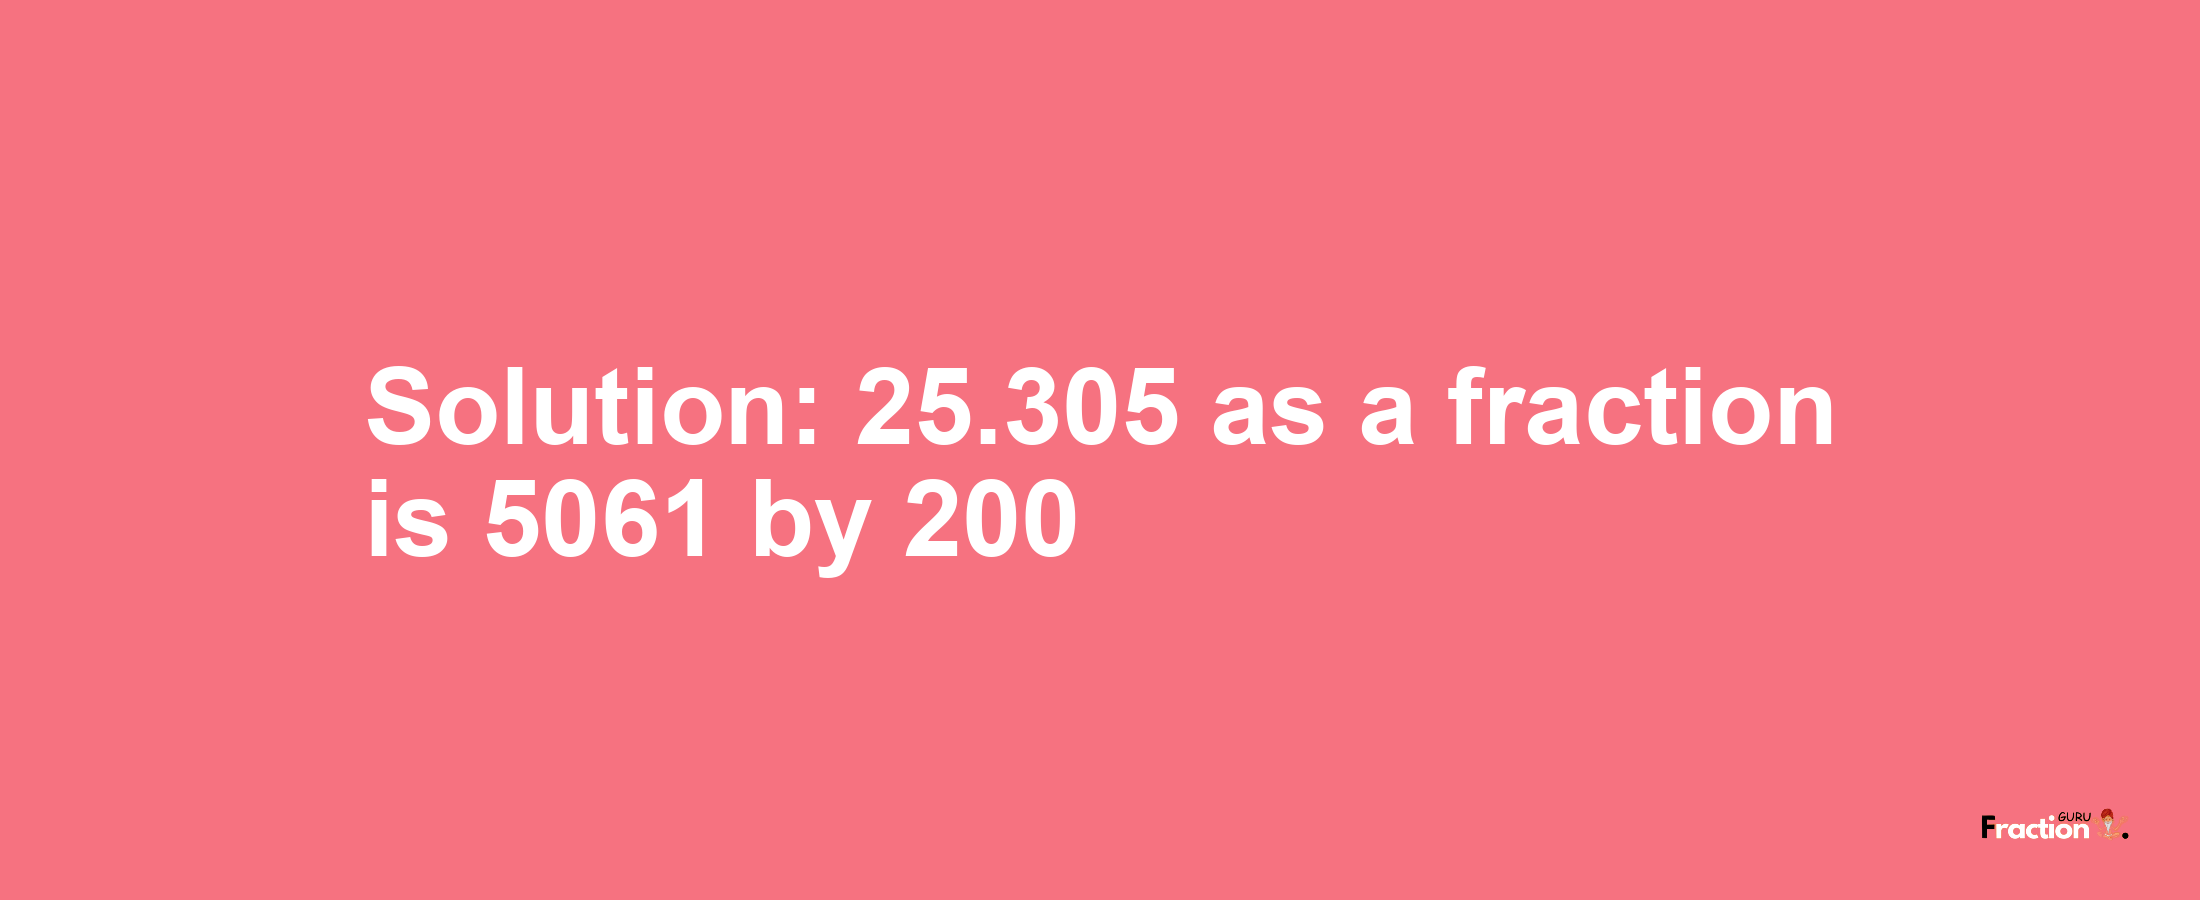 Solution:25.305 as a fraction is 5061/200